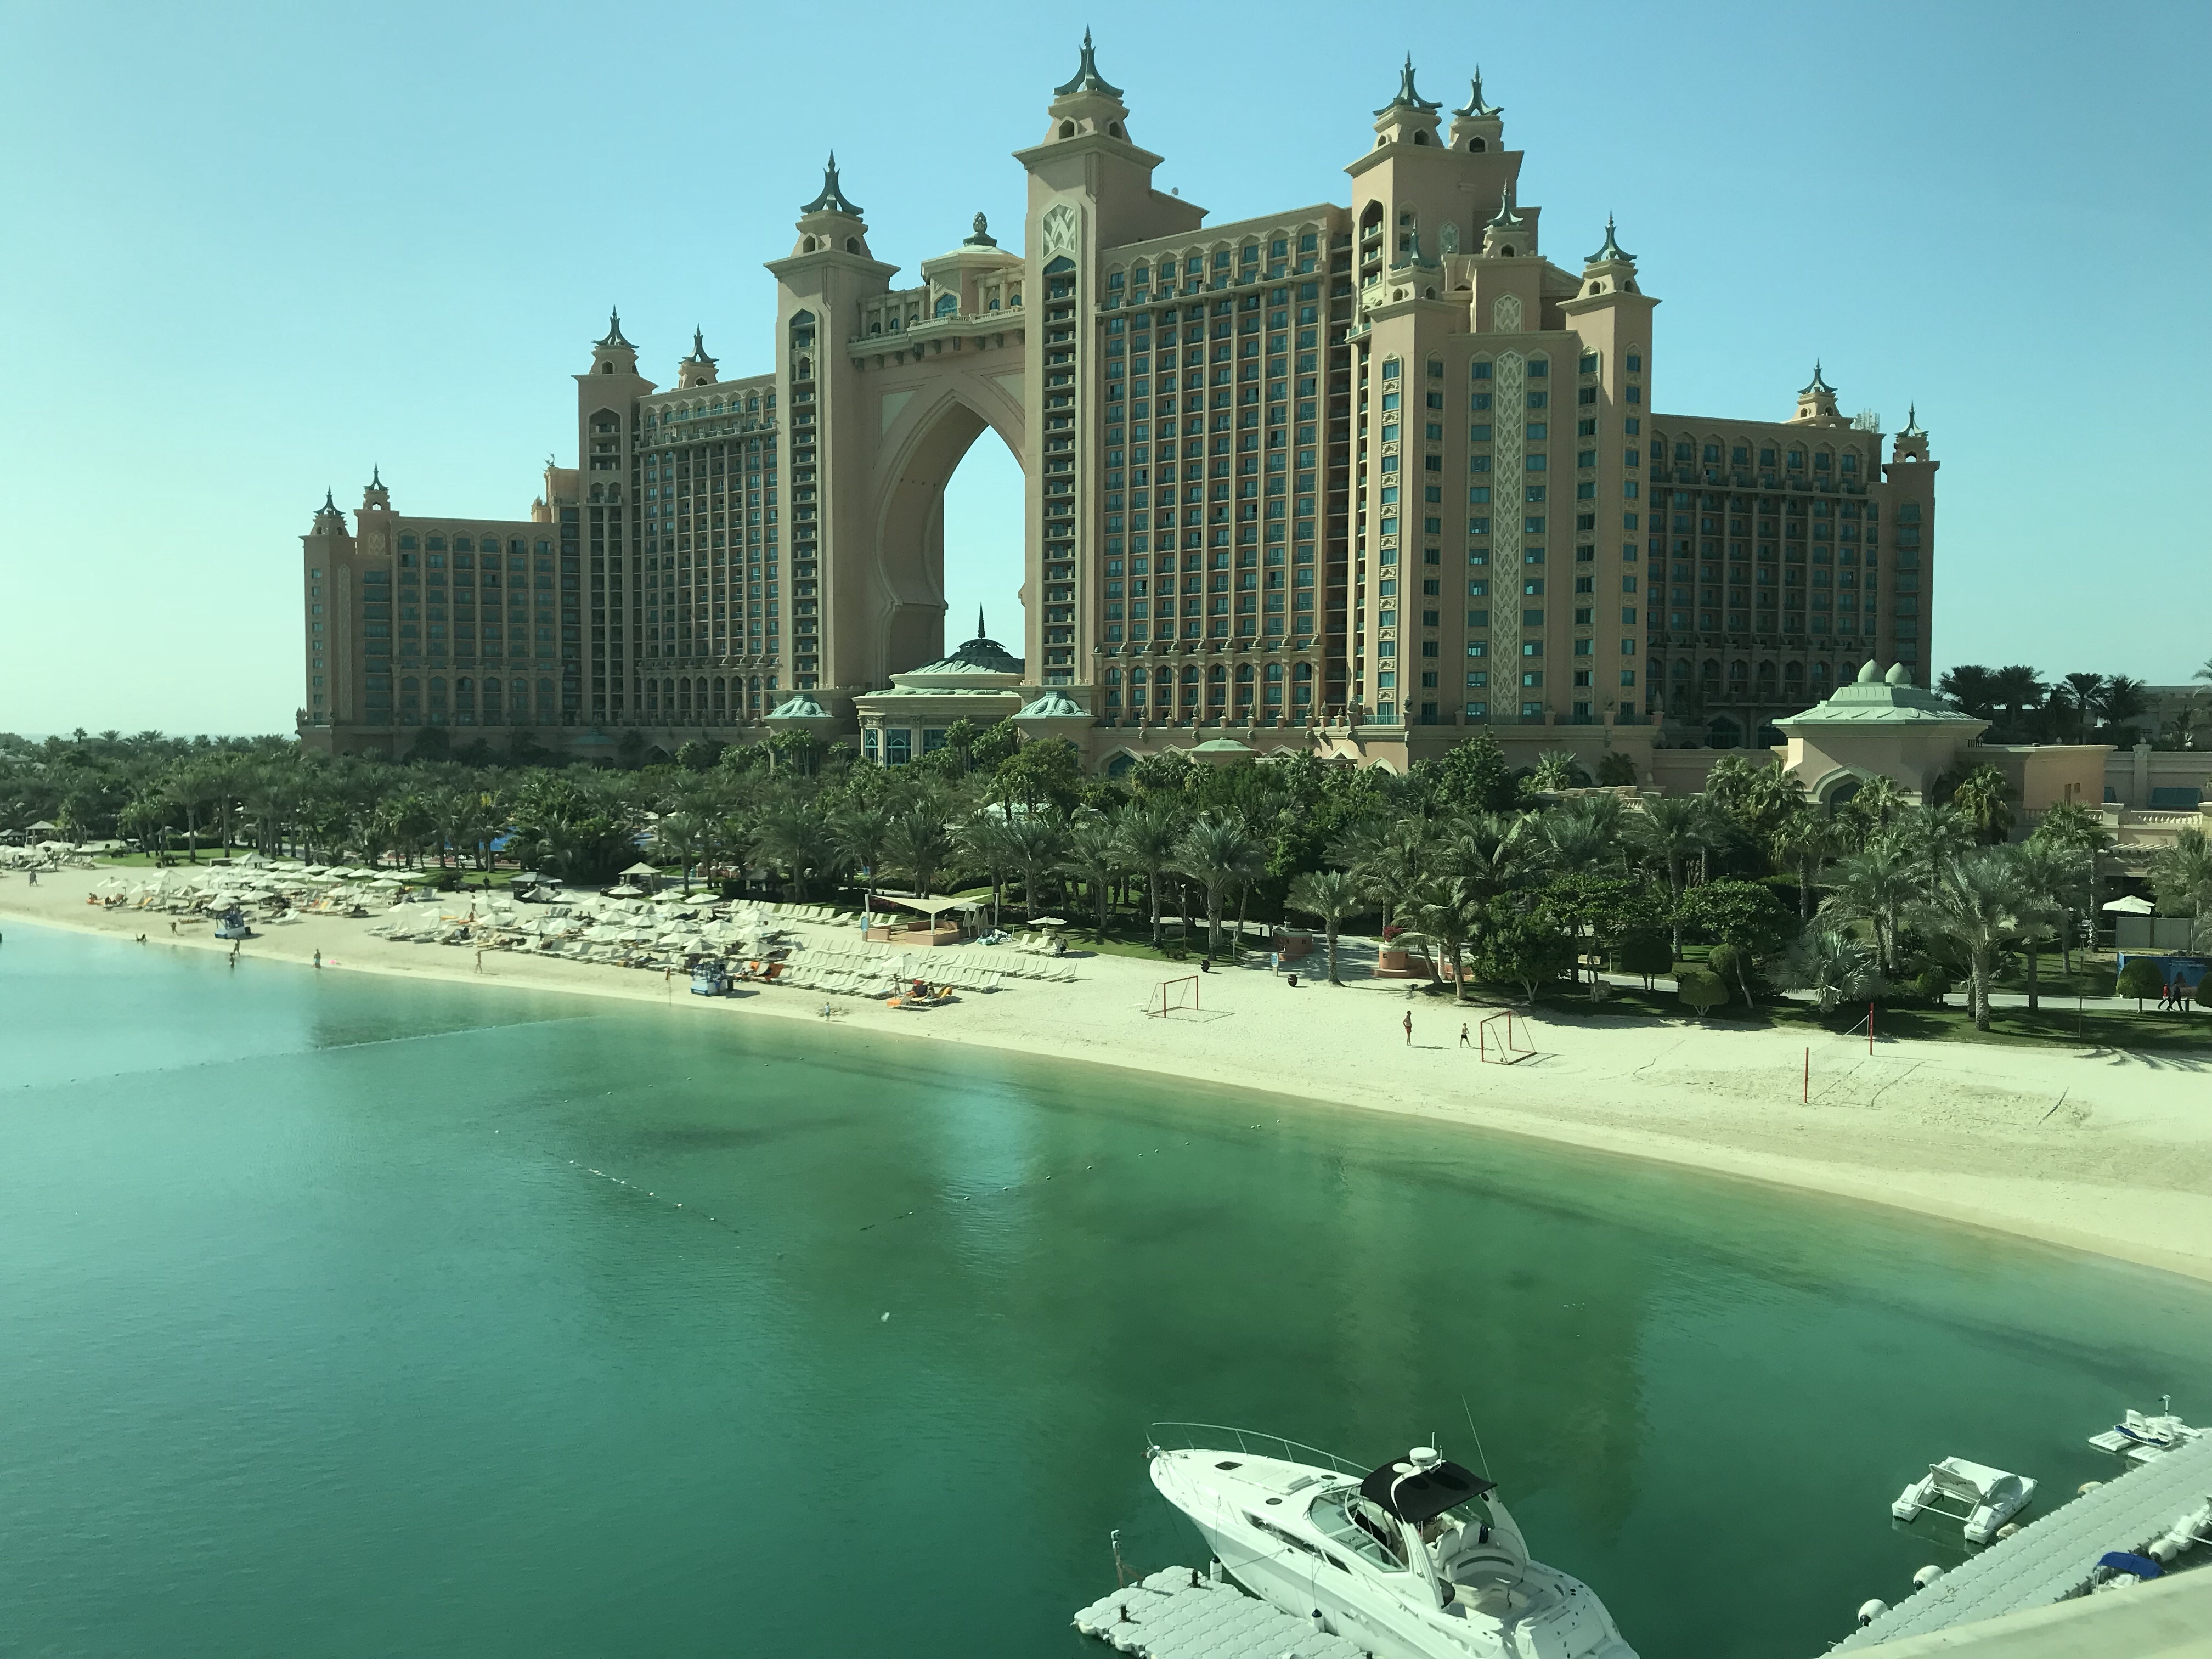 The Palm Atlantis from the tram